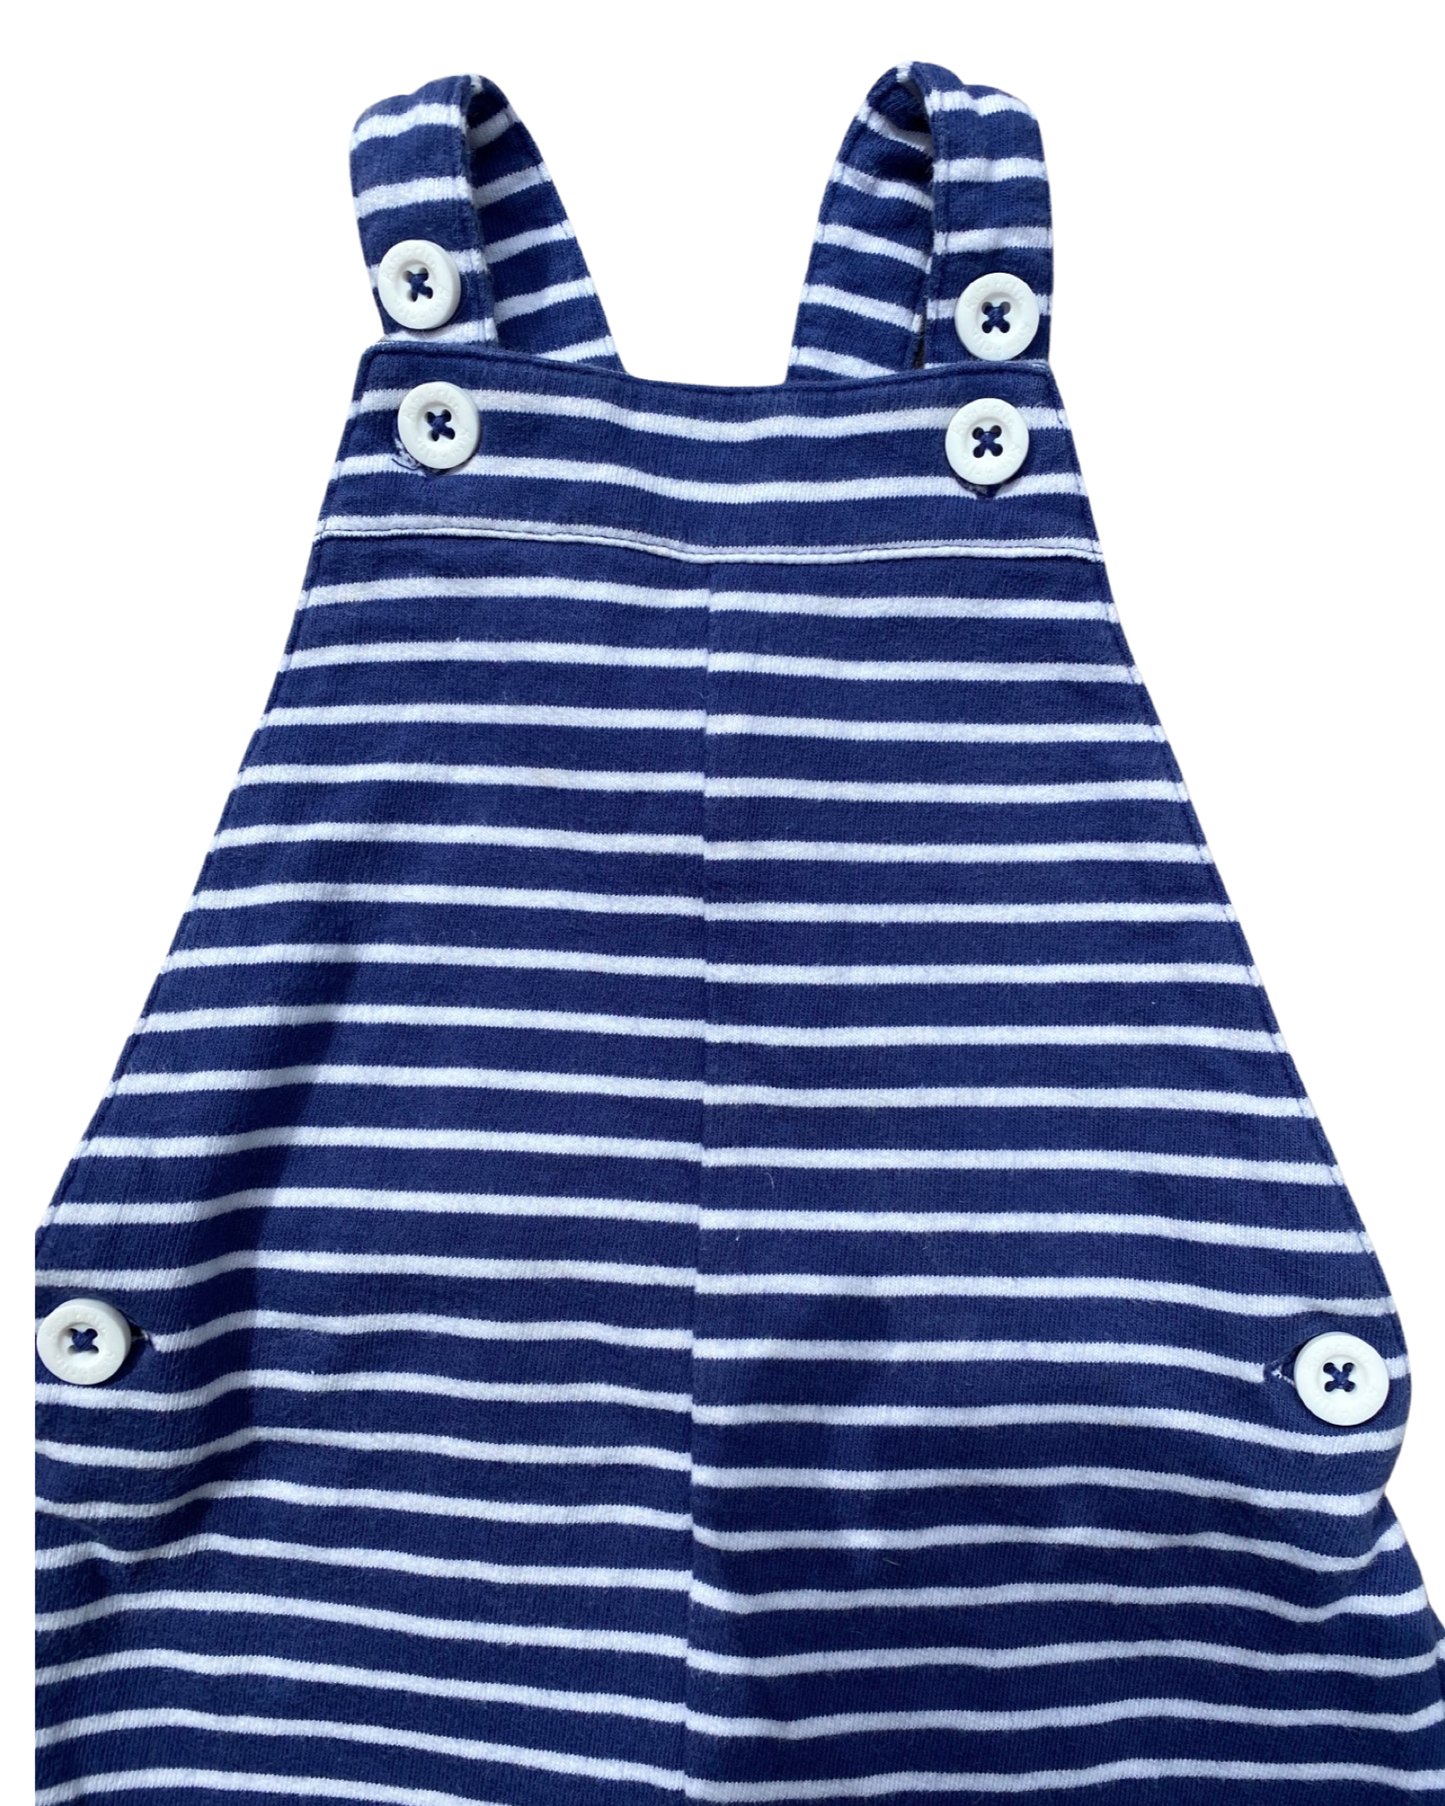 Baby Boden striped short jersey dungarees (6-9mths)